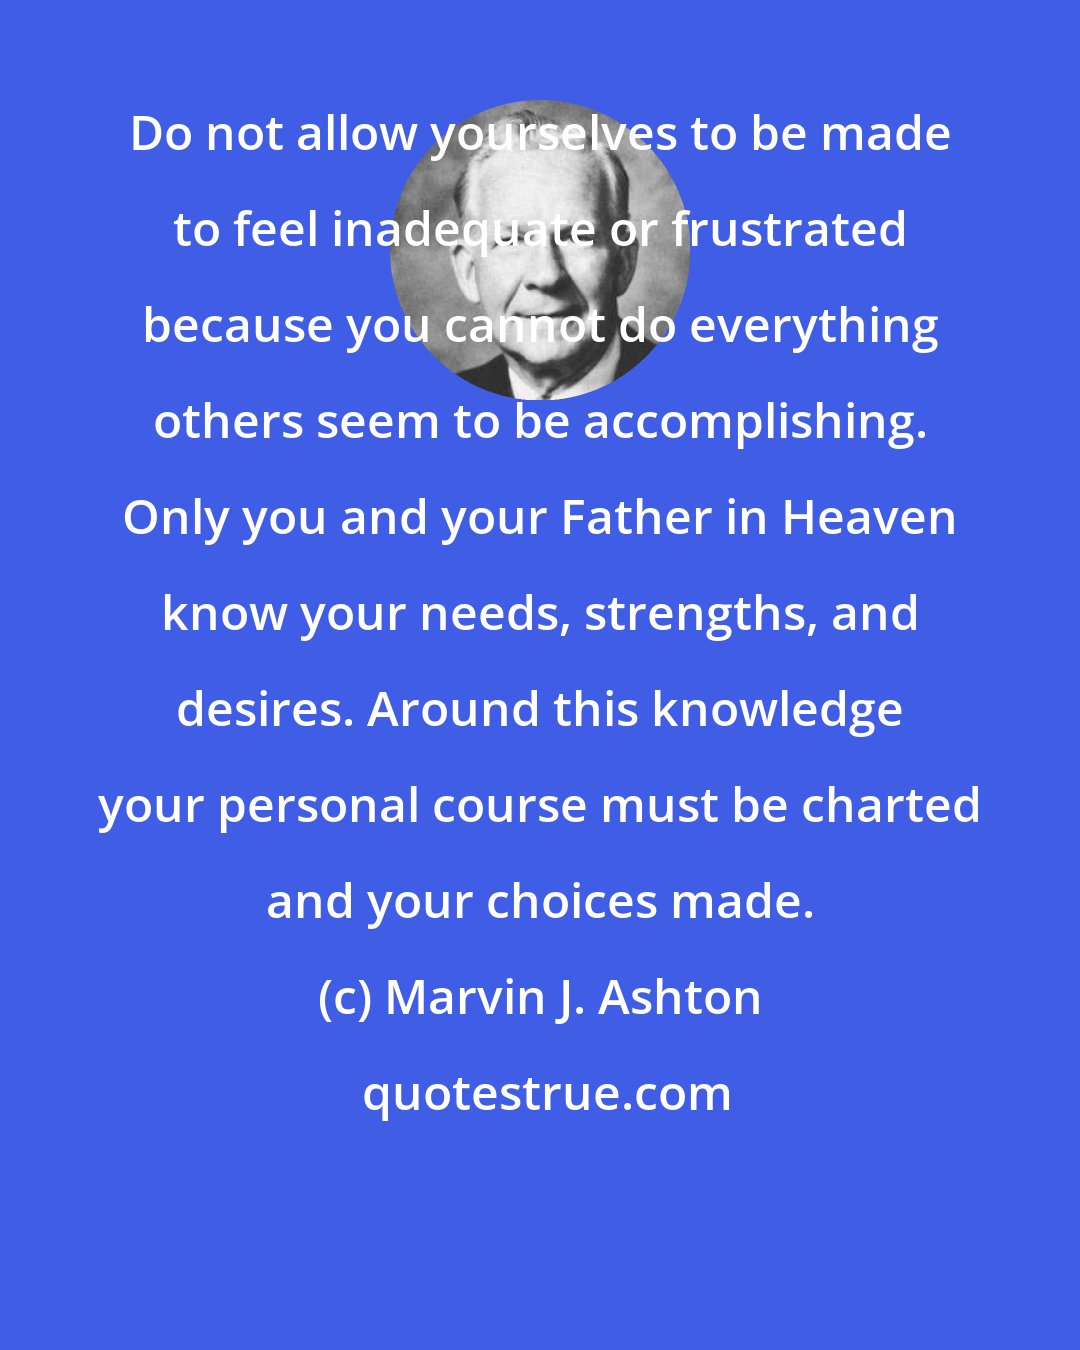 Marvin J. Ashton: Do not allow yourselves to be made to feel inadequate or frustrated because you cannot do everything others seem to be accomplishing. Only you and your Father in Heaven know your needs, strengths, and desires. Around this knowledge your personal course must be charted and your choices made.